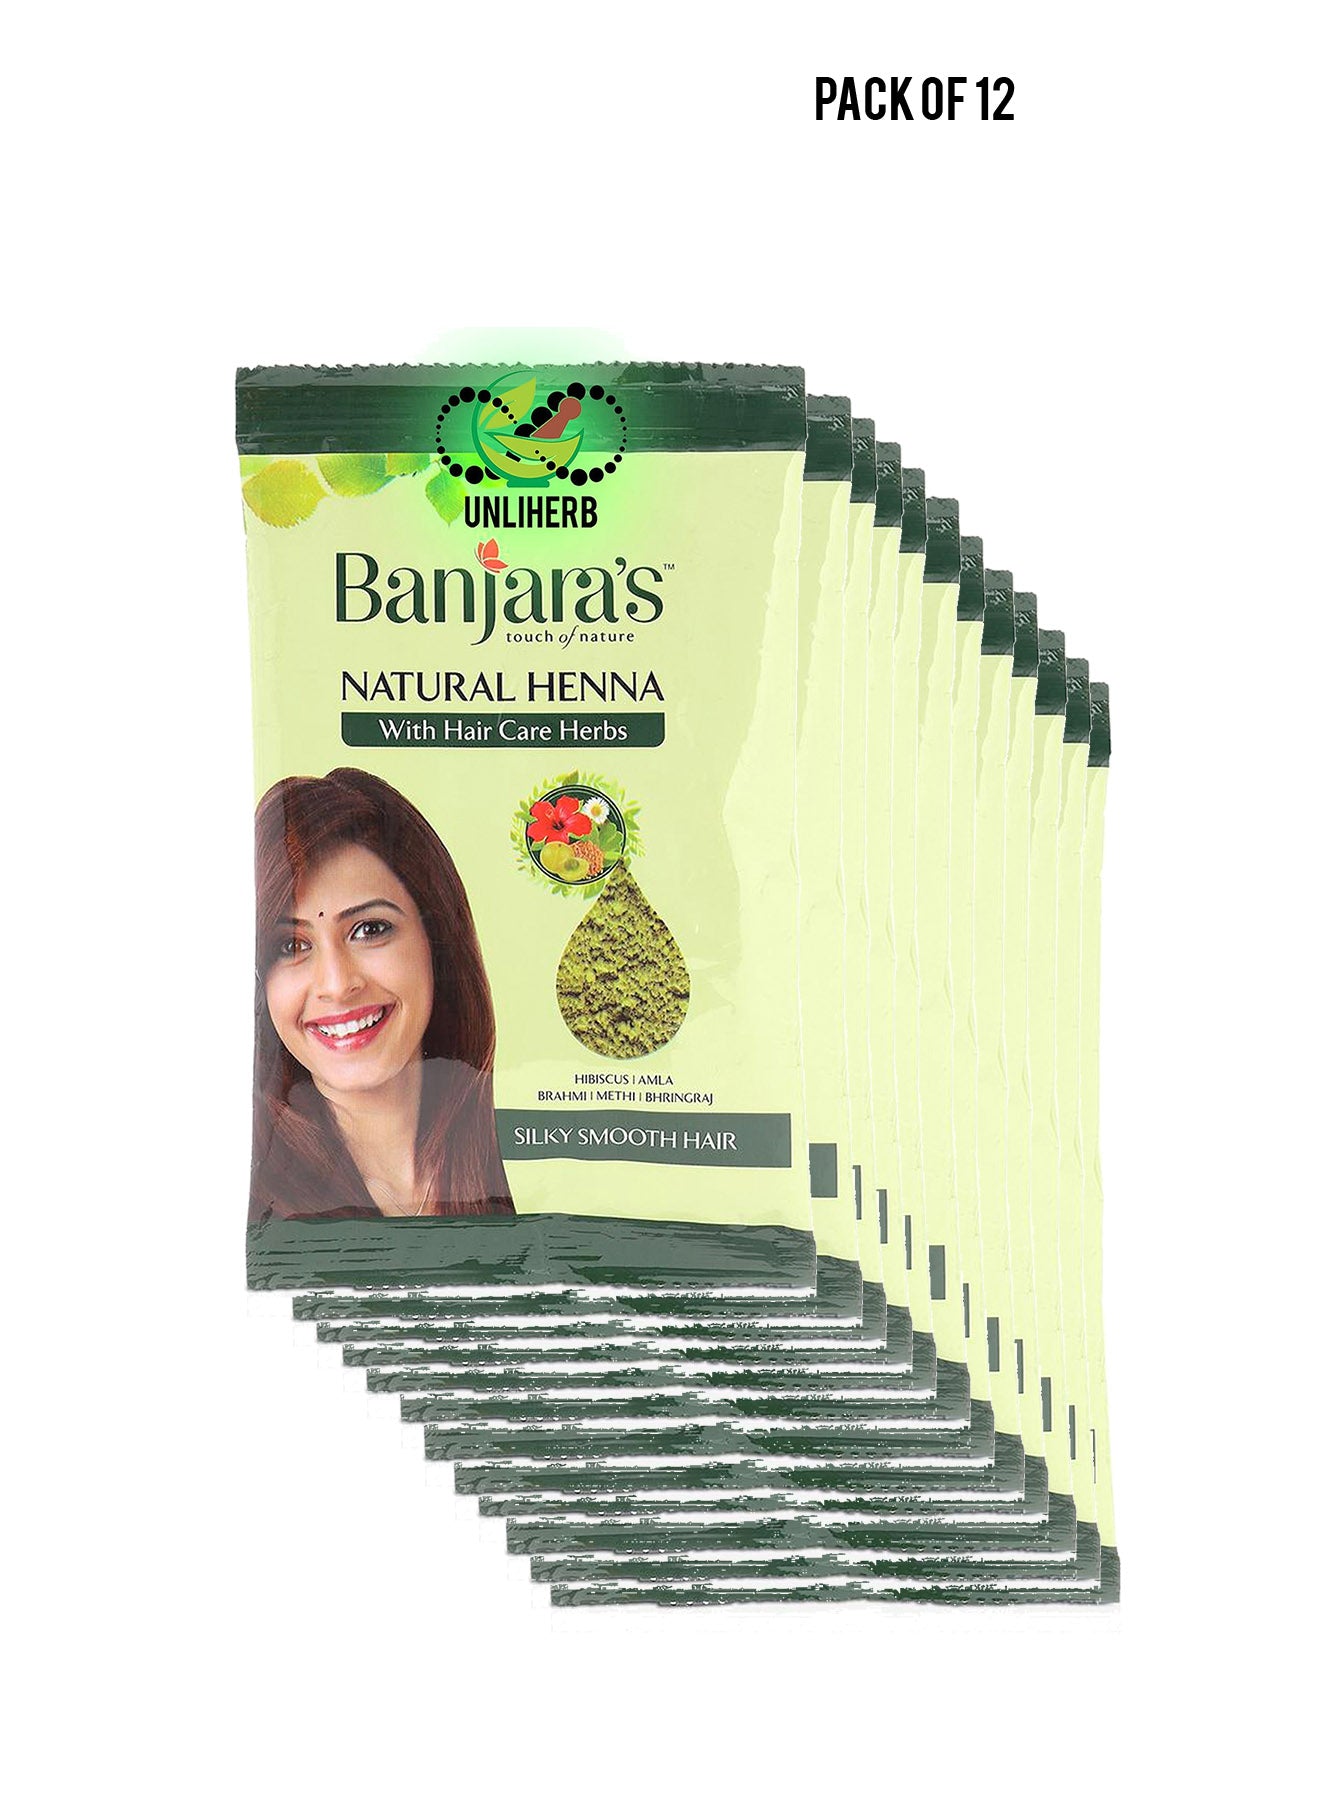 Banjaras Natural Henna with Hair Care Herbs pouch 100g Value Pack of 12 